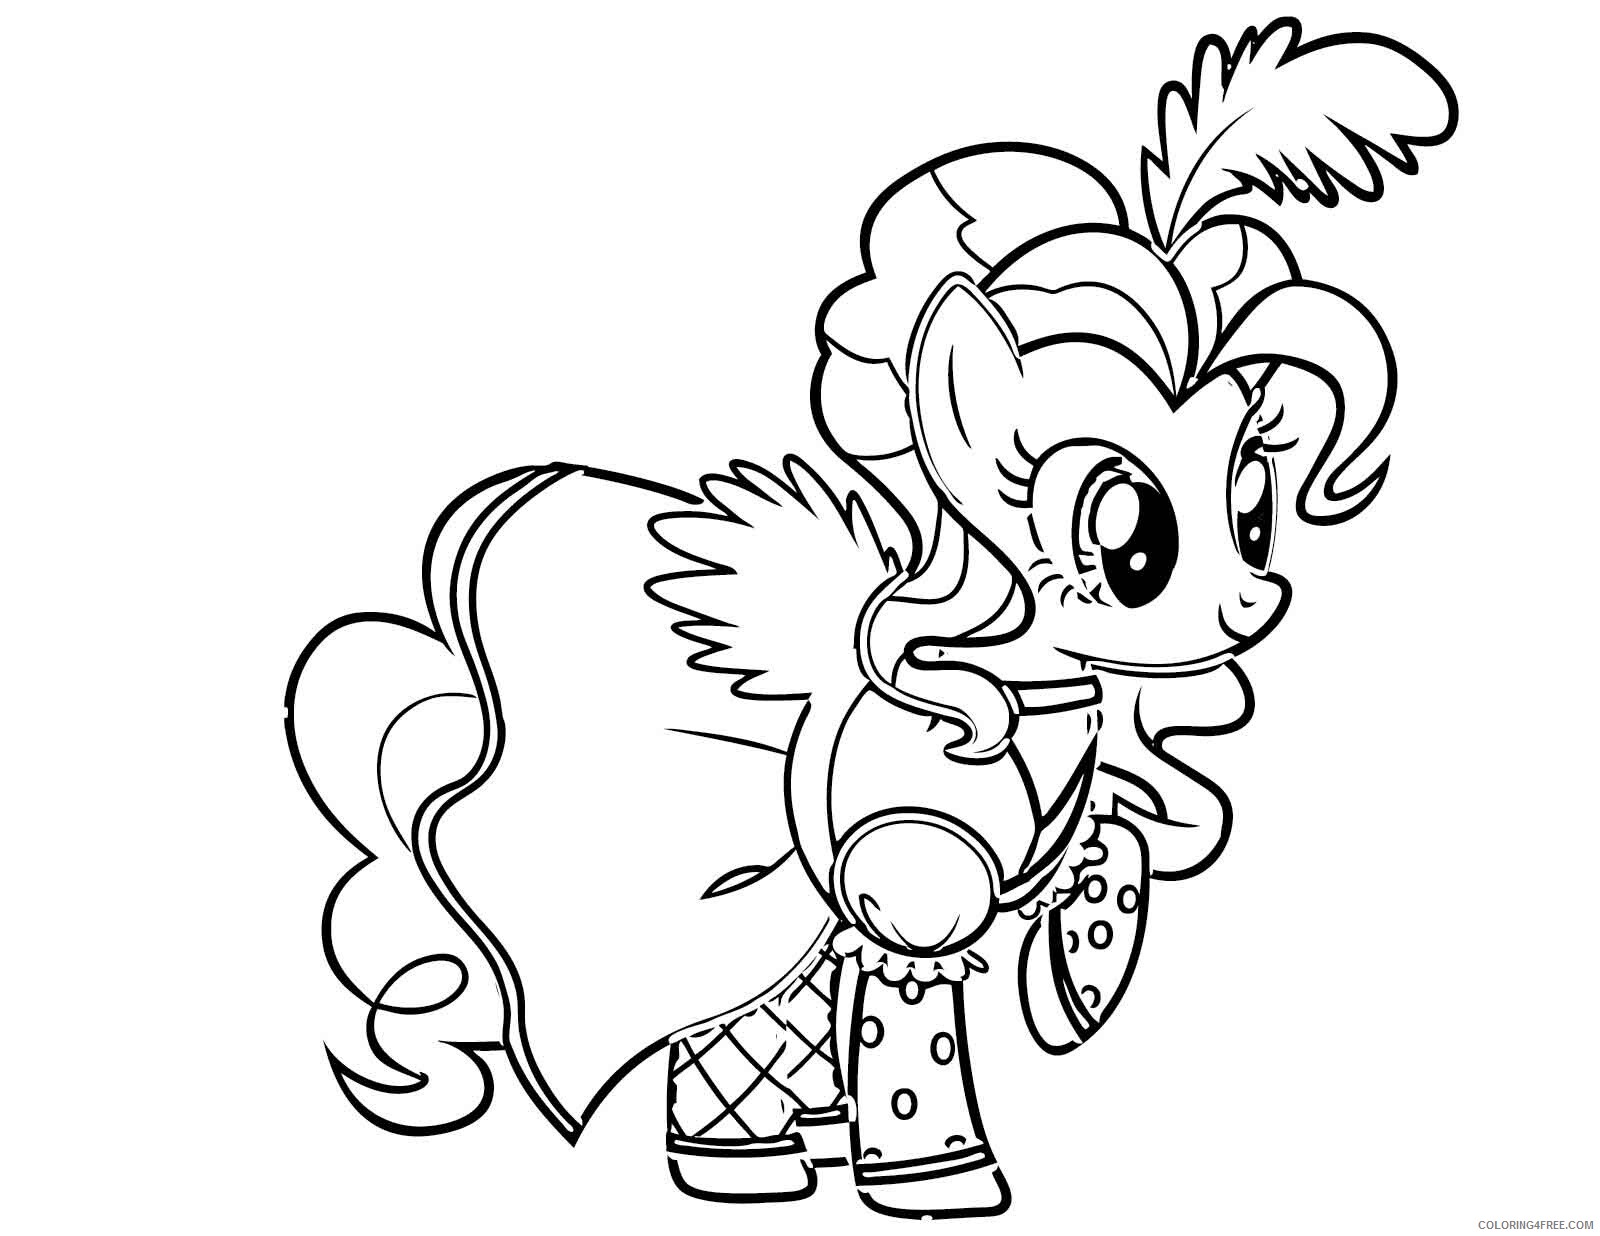 Christmas Coloring Pages MLP Her Costume for Christmas Printable 2020 093 Coloring4free